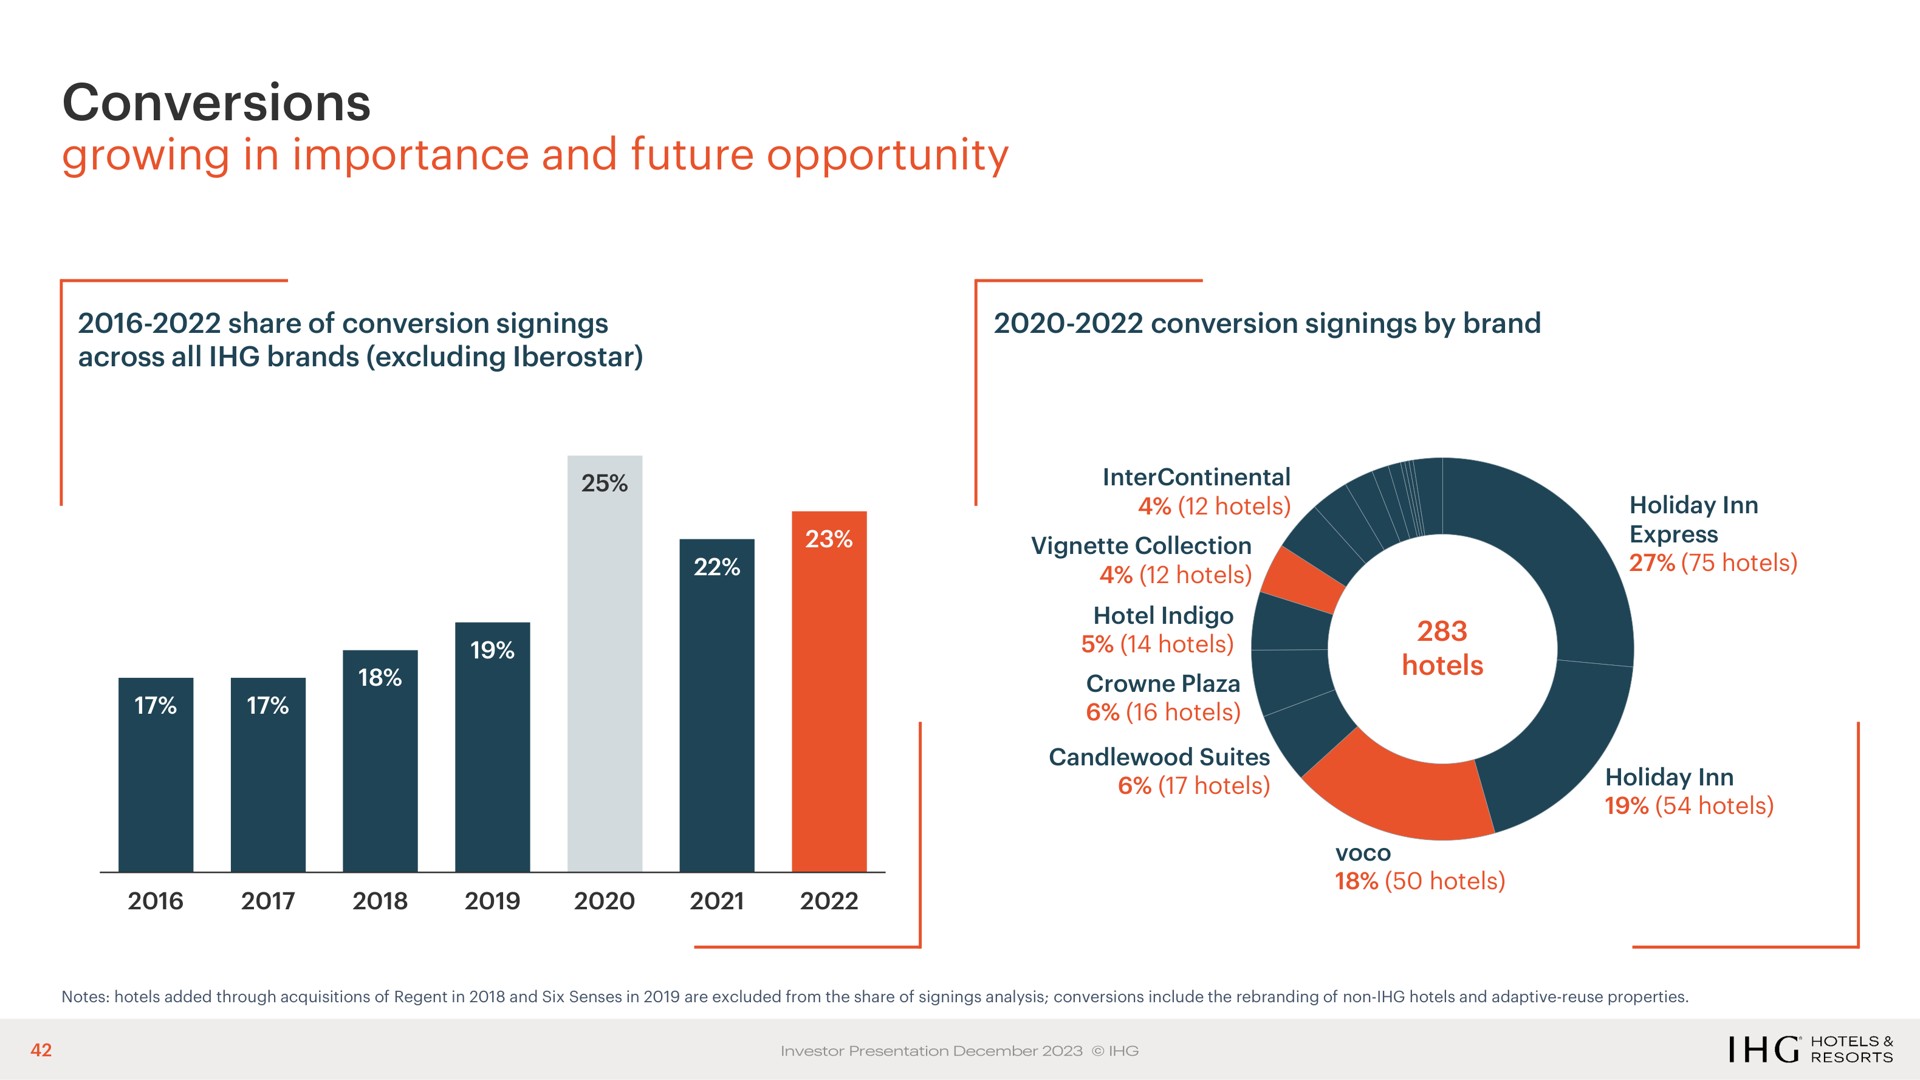 conversions growing in importance and future opportunity | IHG Hotels